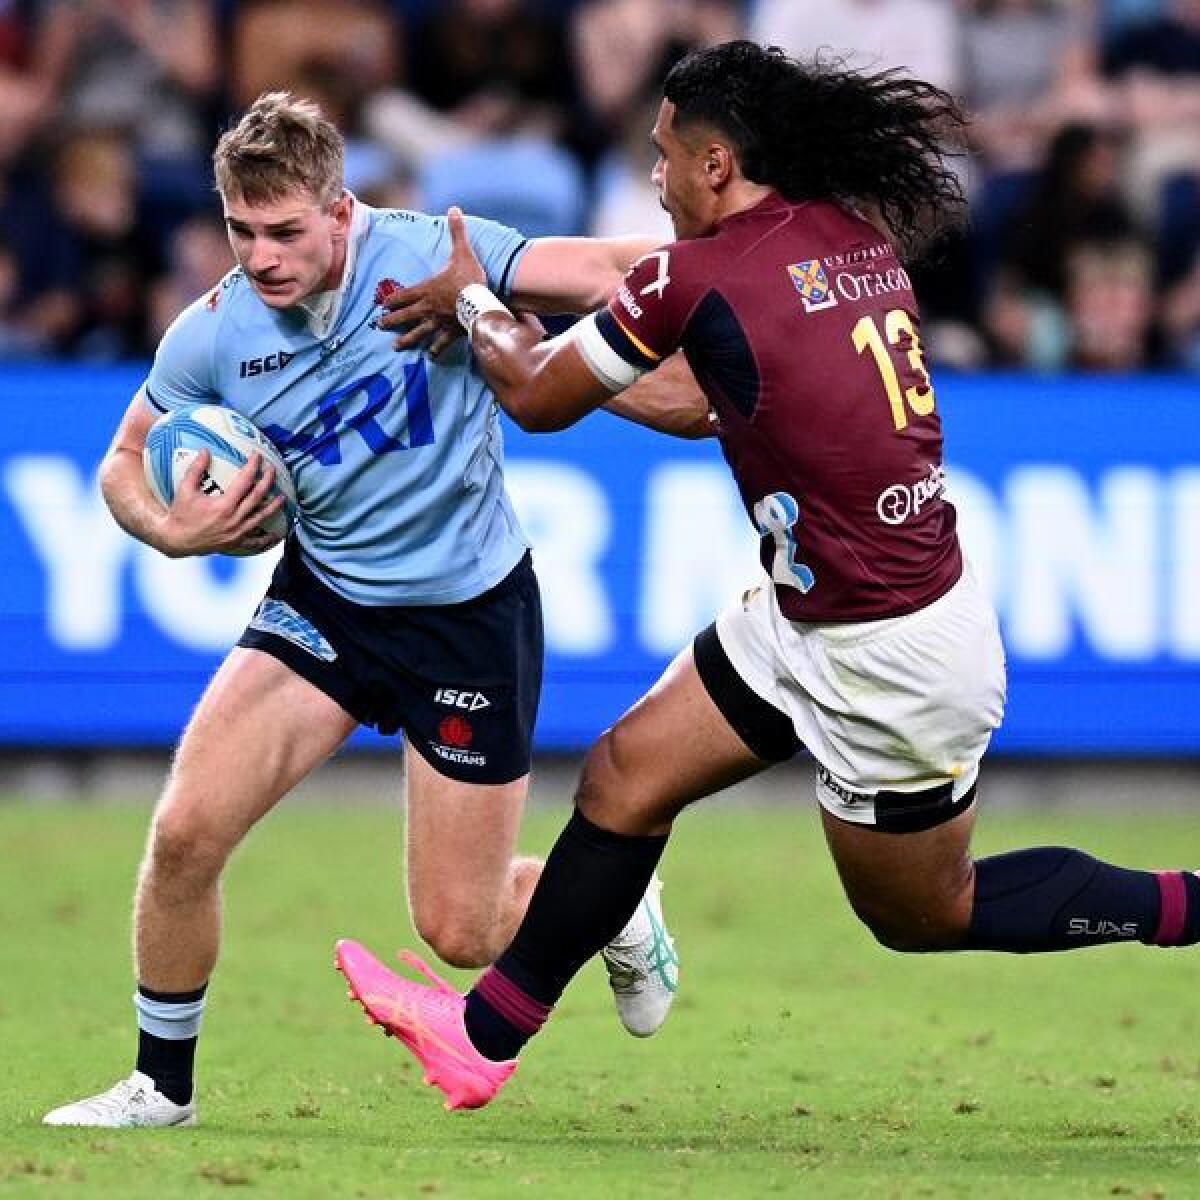 Max Jorgensen on the ball for the Waratahs against the Highlanders.